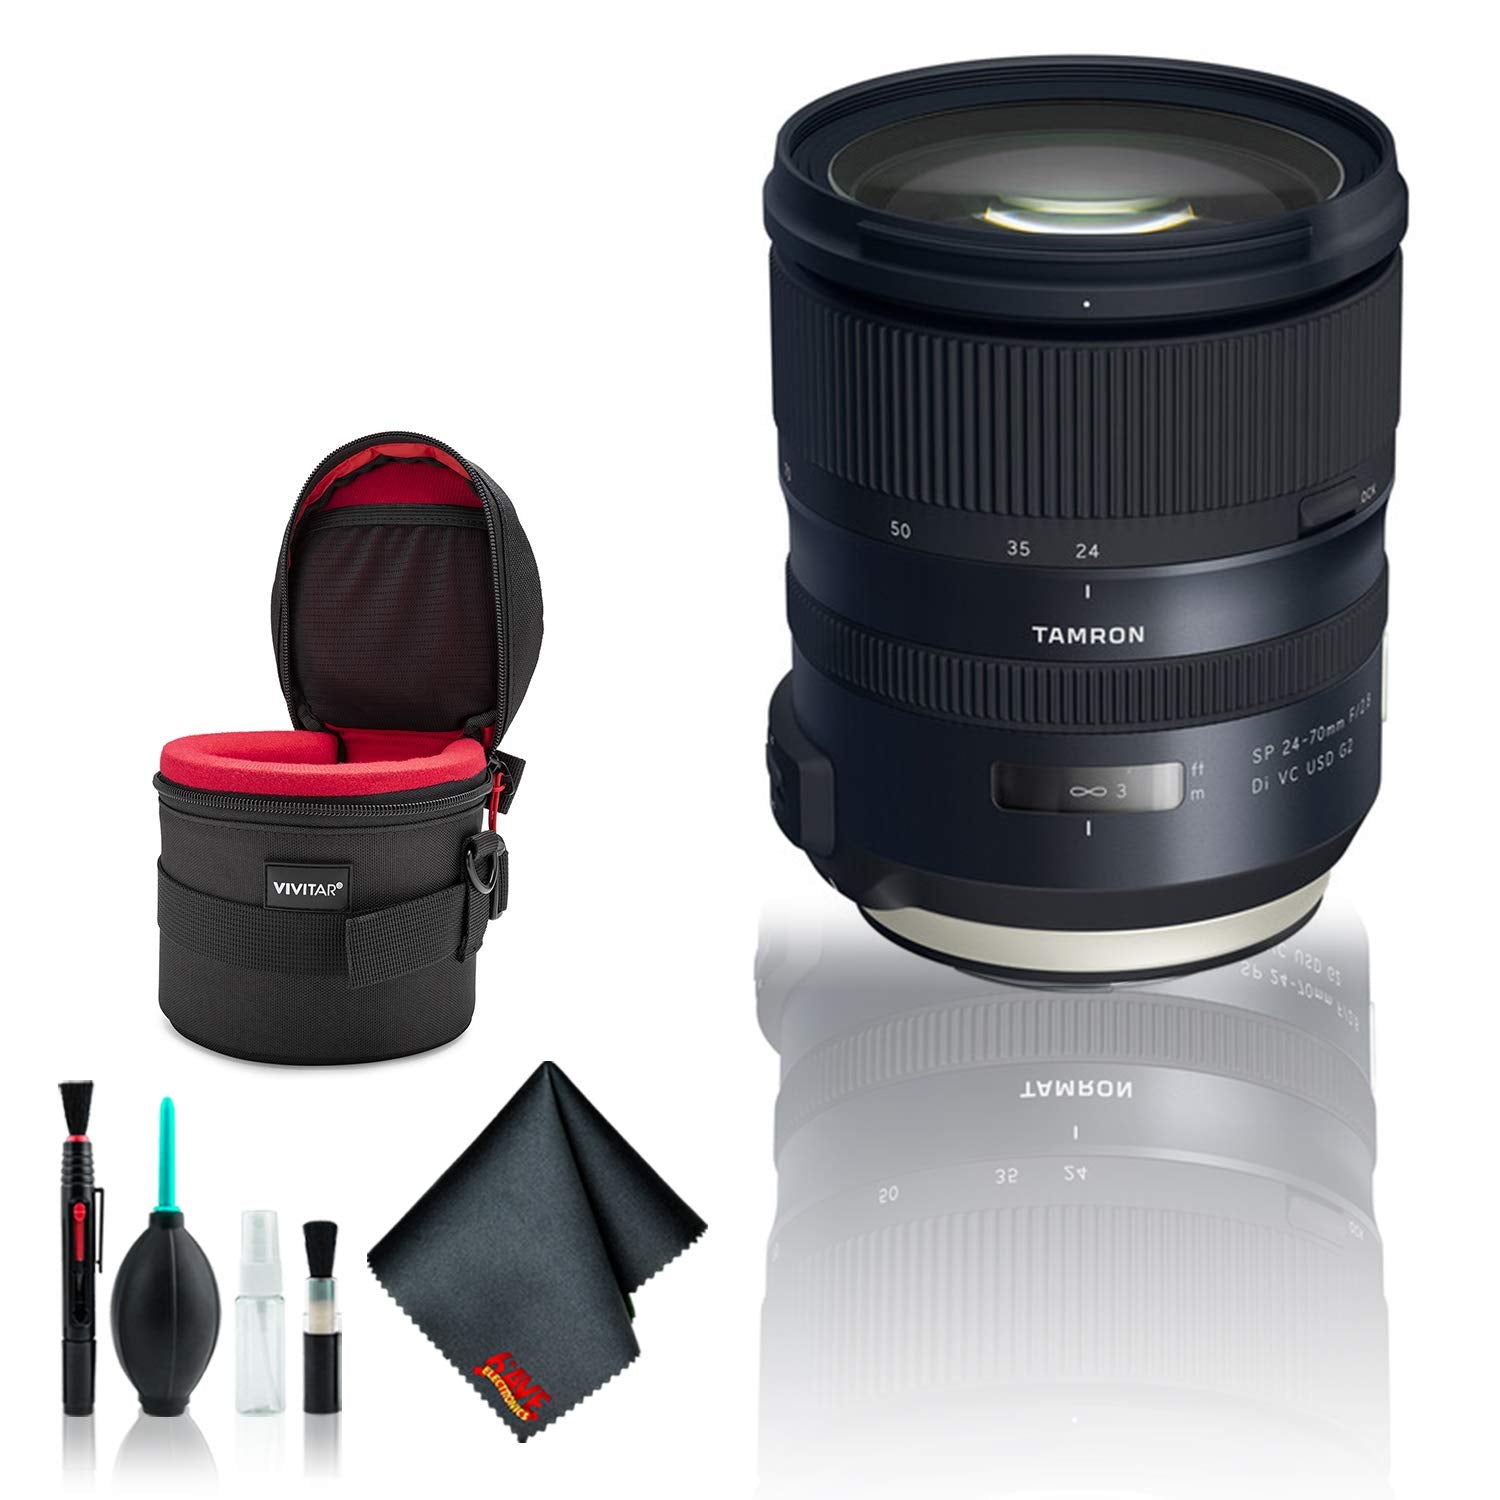 Tamron SP 24-70mm f/2.8 Di VC USD G2 Lens for Canon EF - Deluxe Bundle